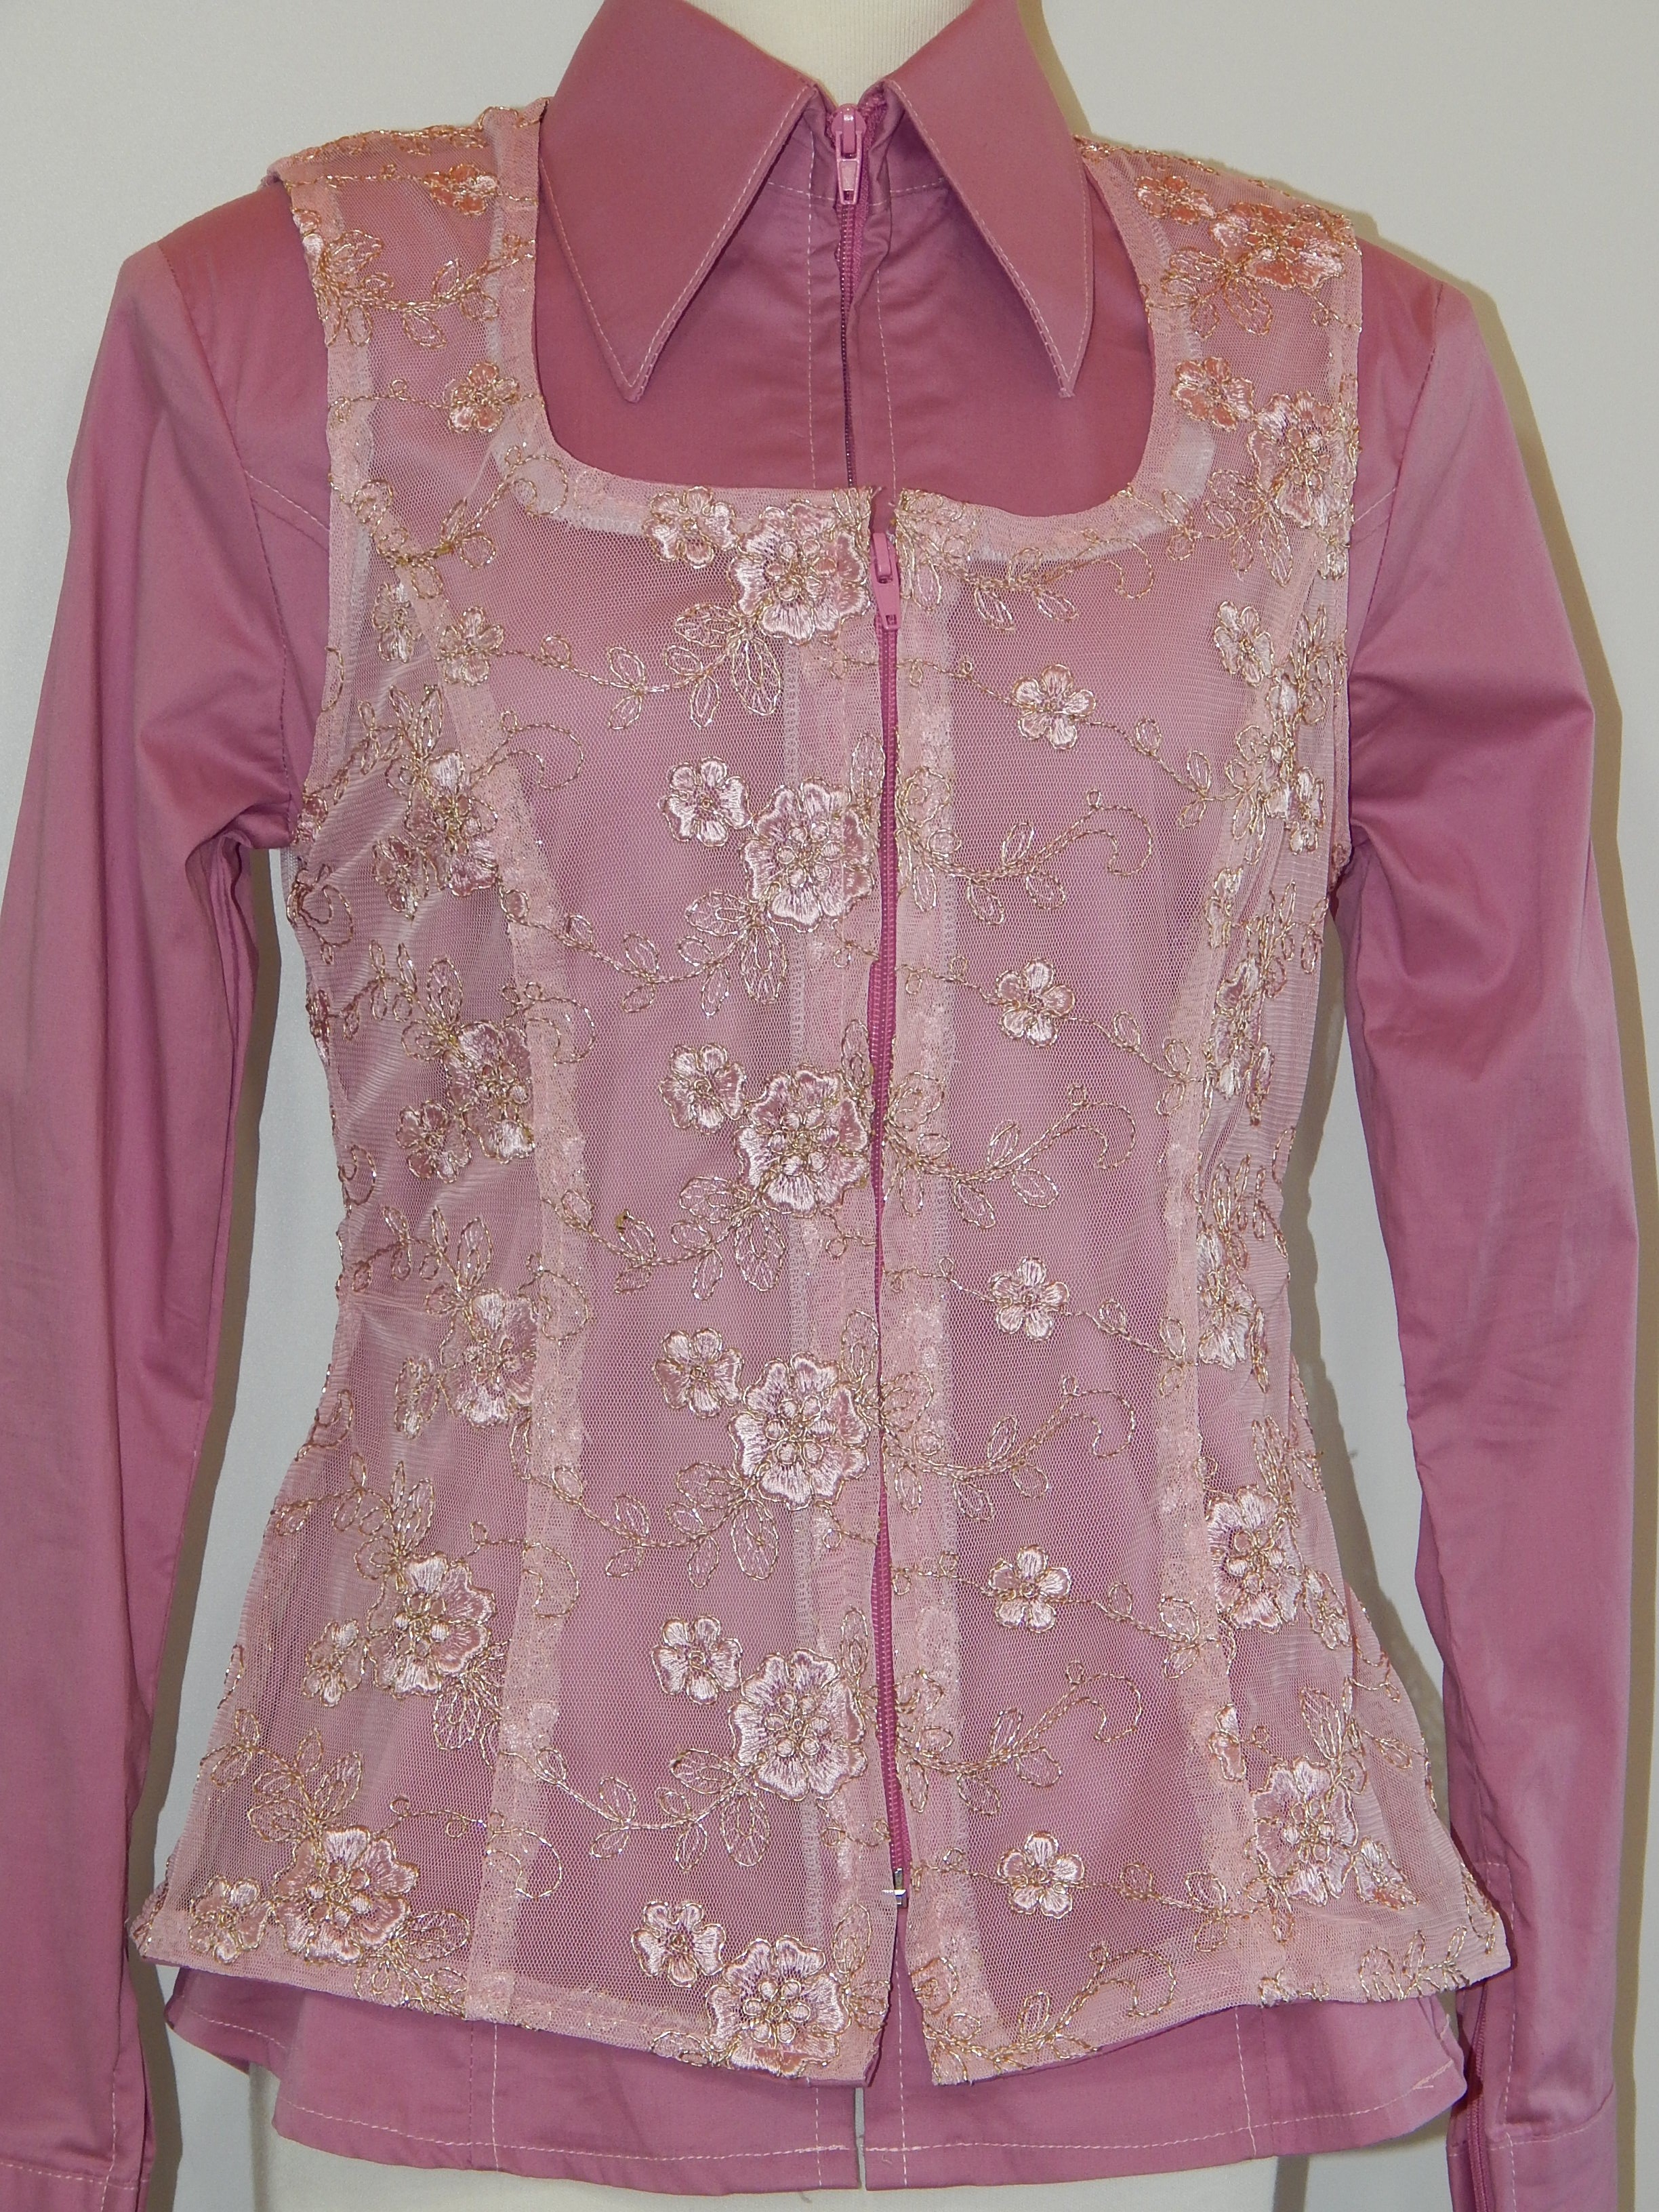 MKC Lace Horse Show Vest - New Pink/Gold Thread